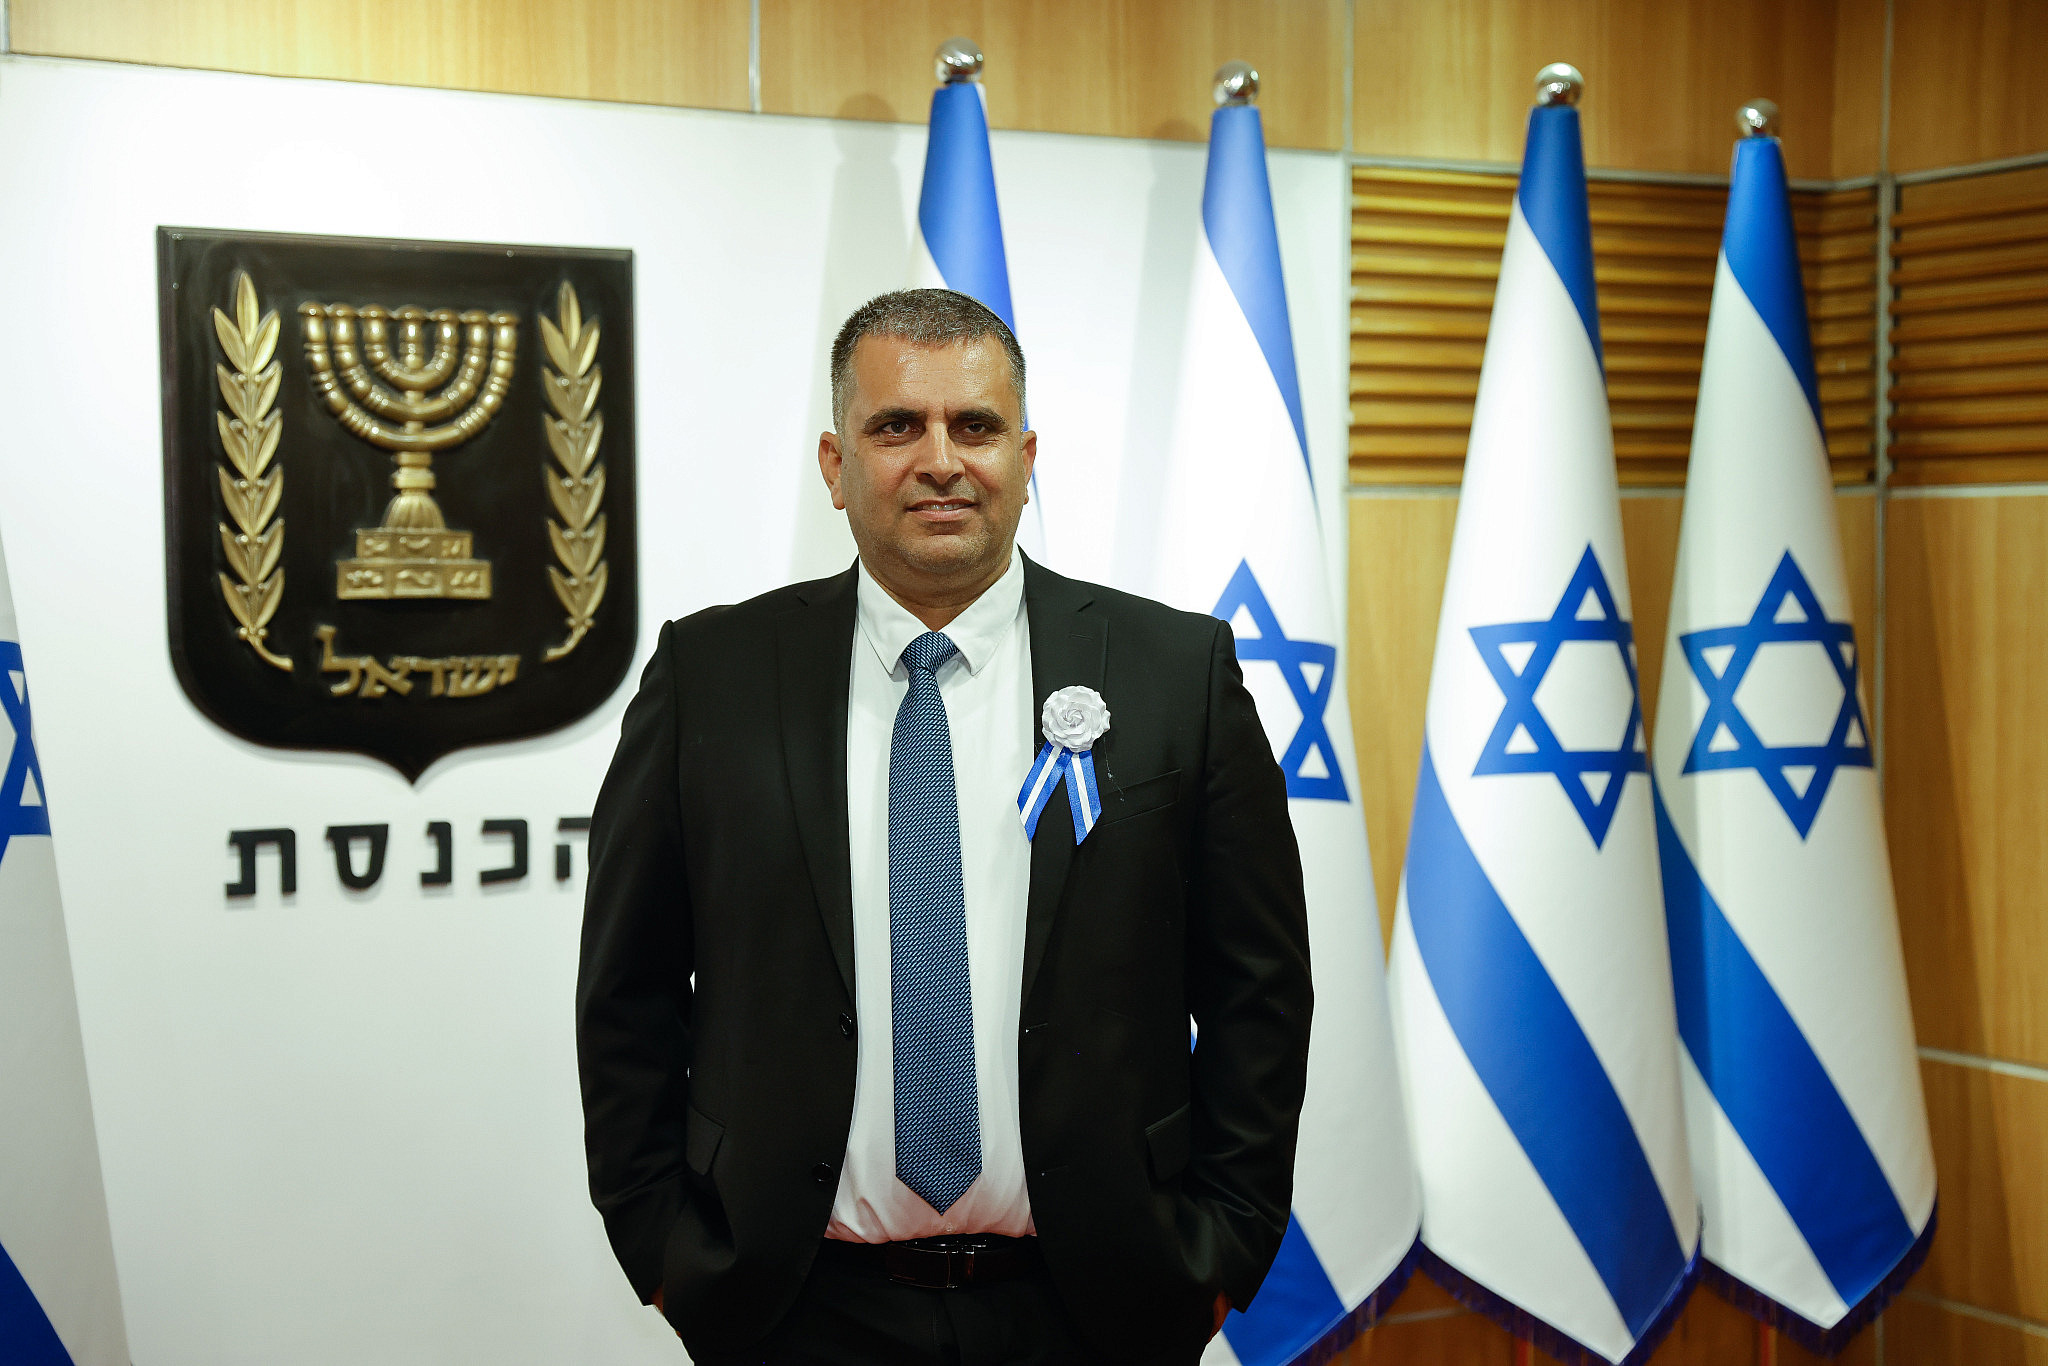 Religious Zionist Party MK Ofir Sofer arrives at the Knesset for its opening session, Jerusalem, November 15, 2022. (Olivier Fitoussi/Flash90)